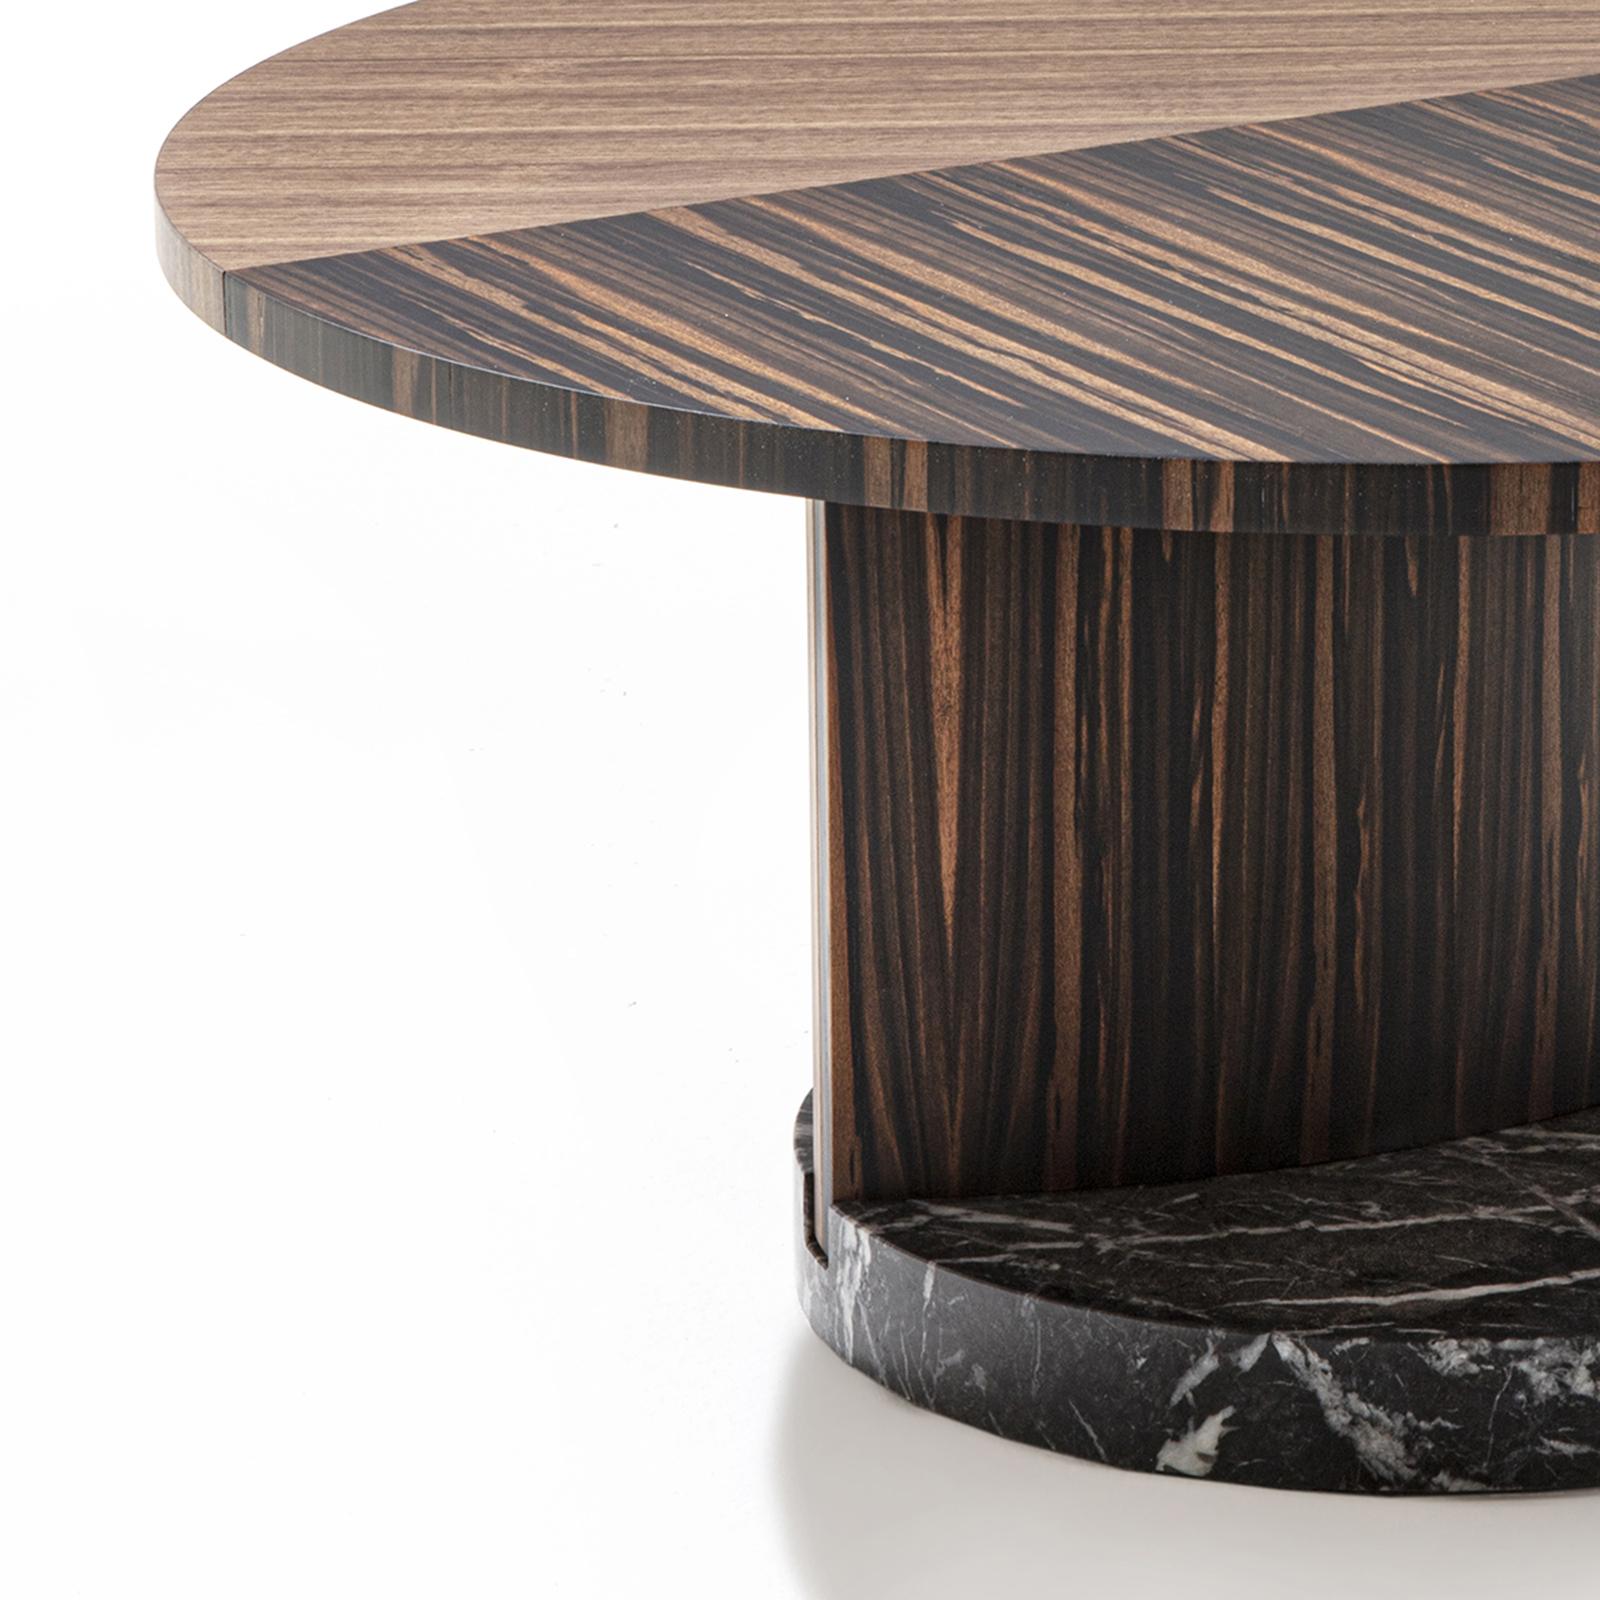 Coffee table walnut patch with top made of solid 
walnut wood and solid amara ebony. Foot in solid 
amara ebony on black marble base.
 